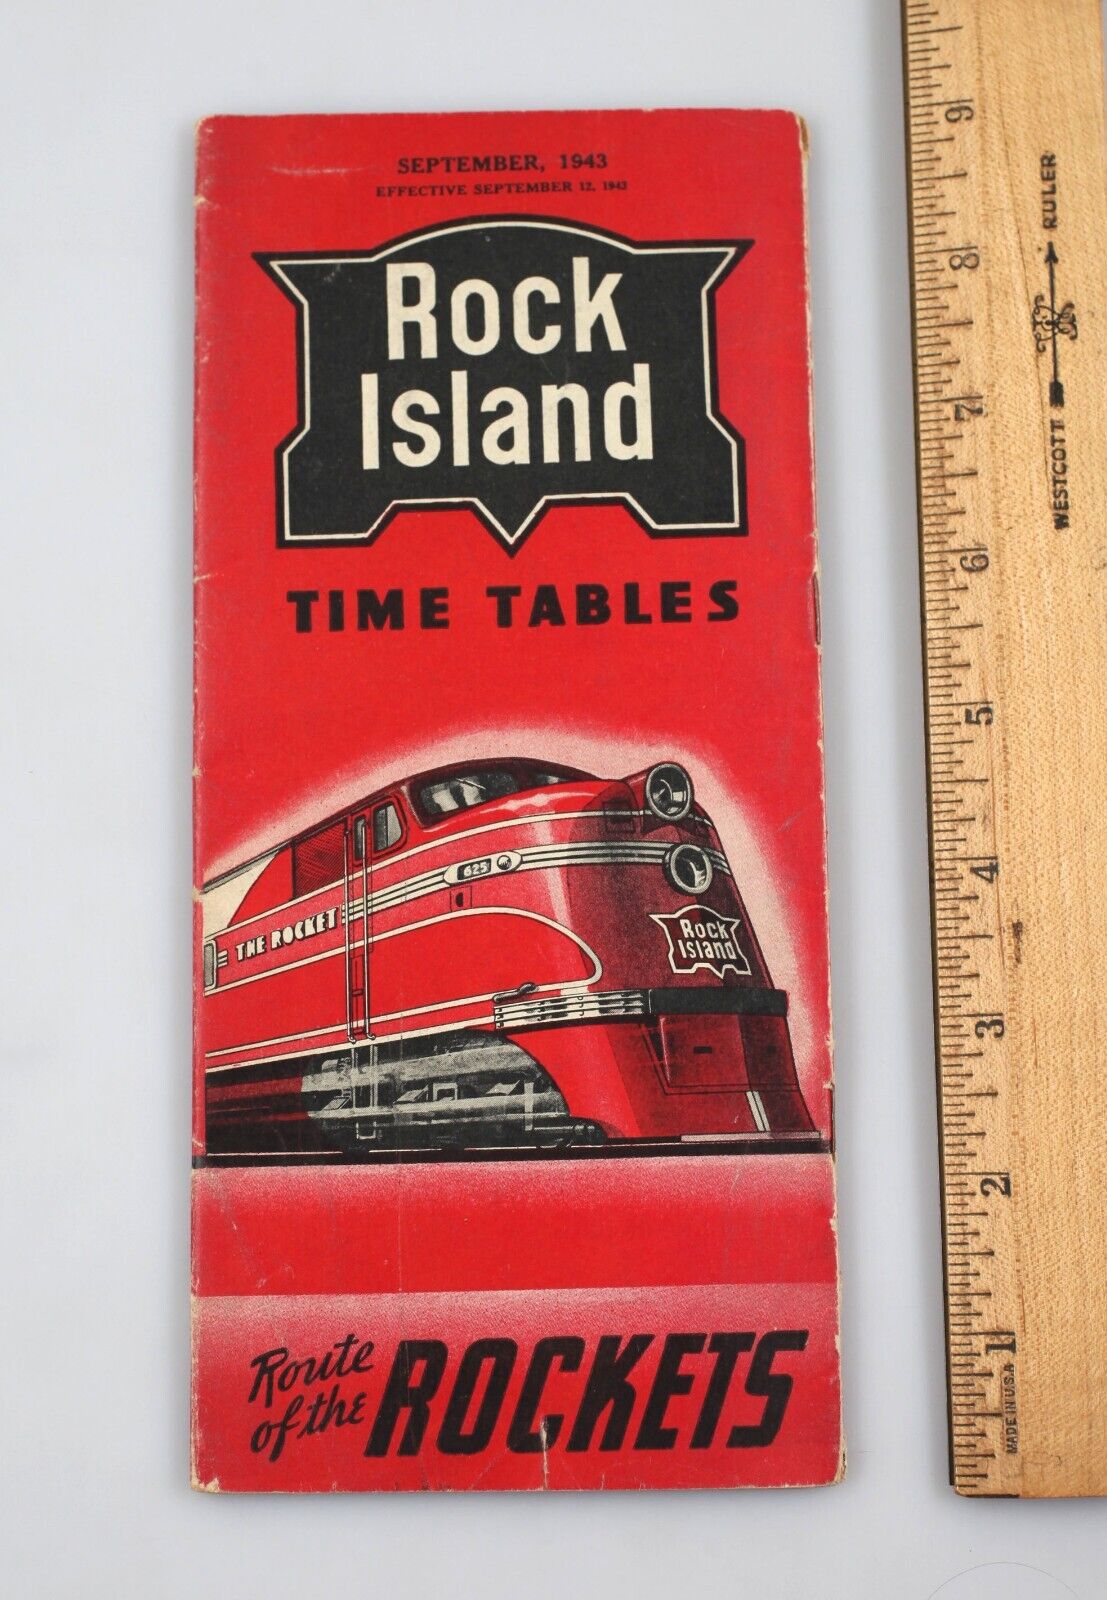 Vintage Wartime 1943 Rock Island Timetable Route of the Rockets